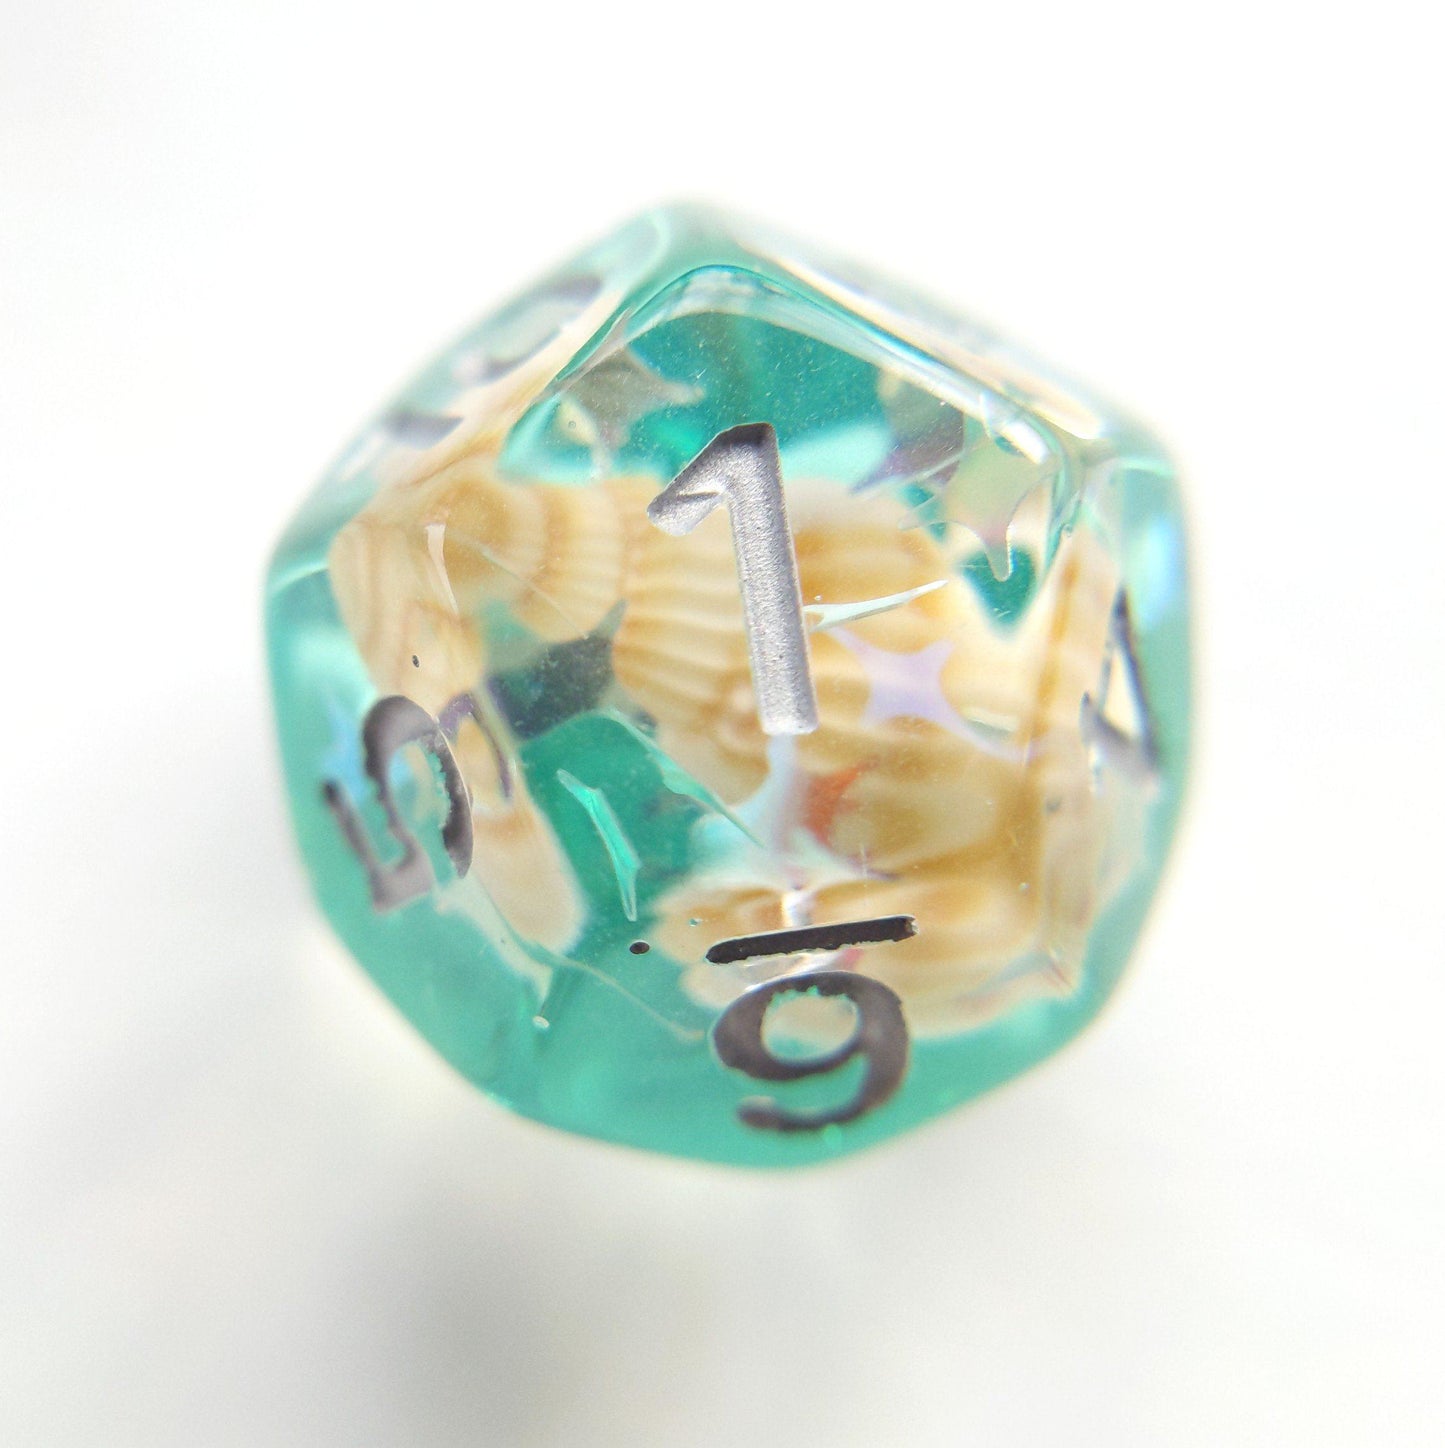 Green Conch Dice Set, Real Seashells from the Ocean - CozyGamer